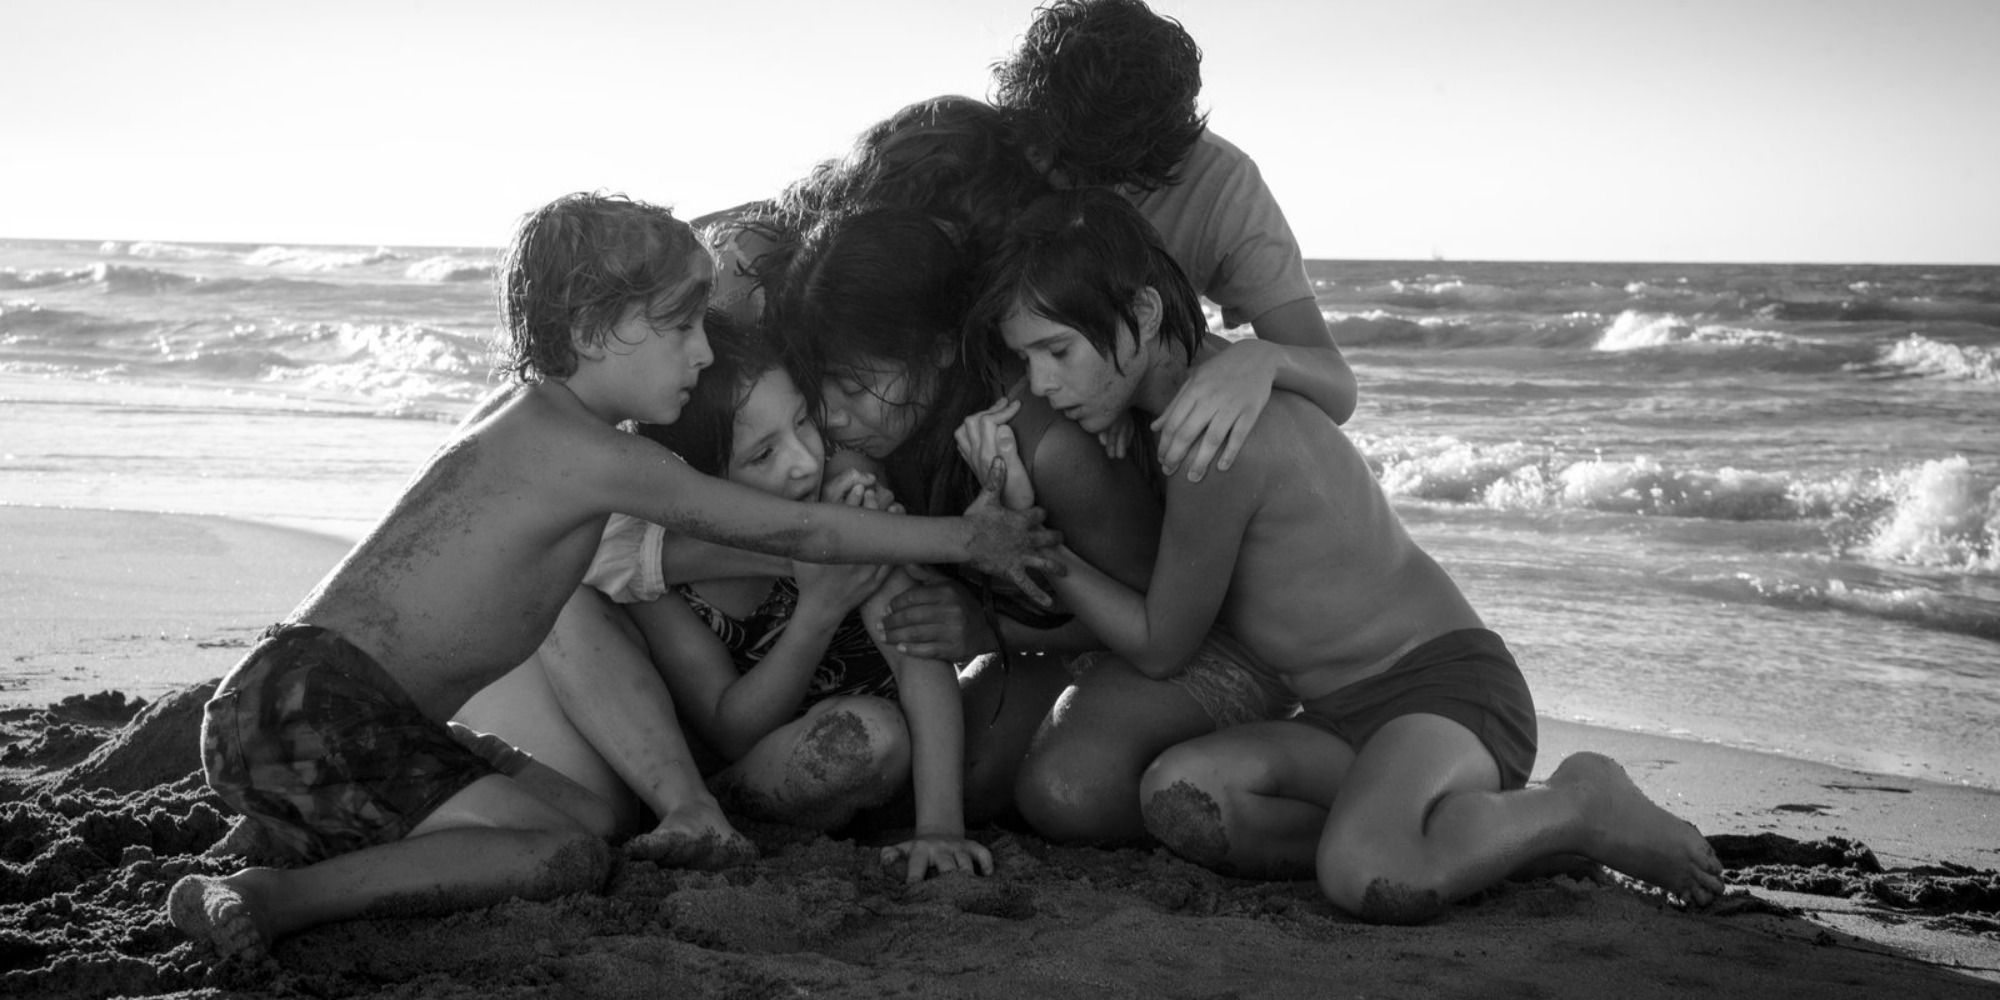 the family of "Roma", hugging in the beach